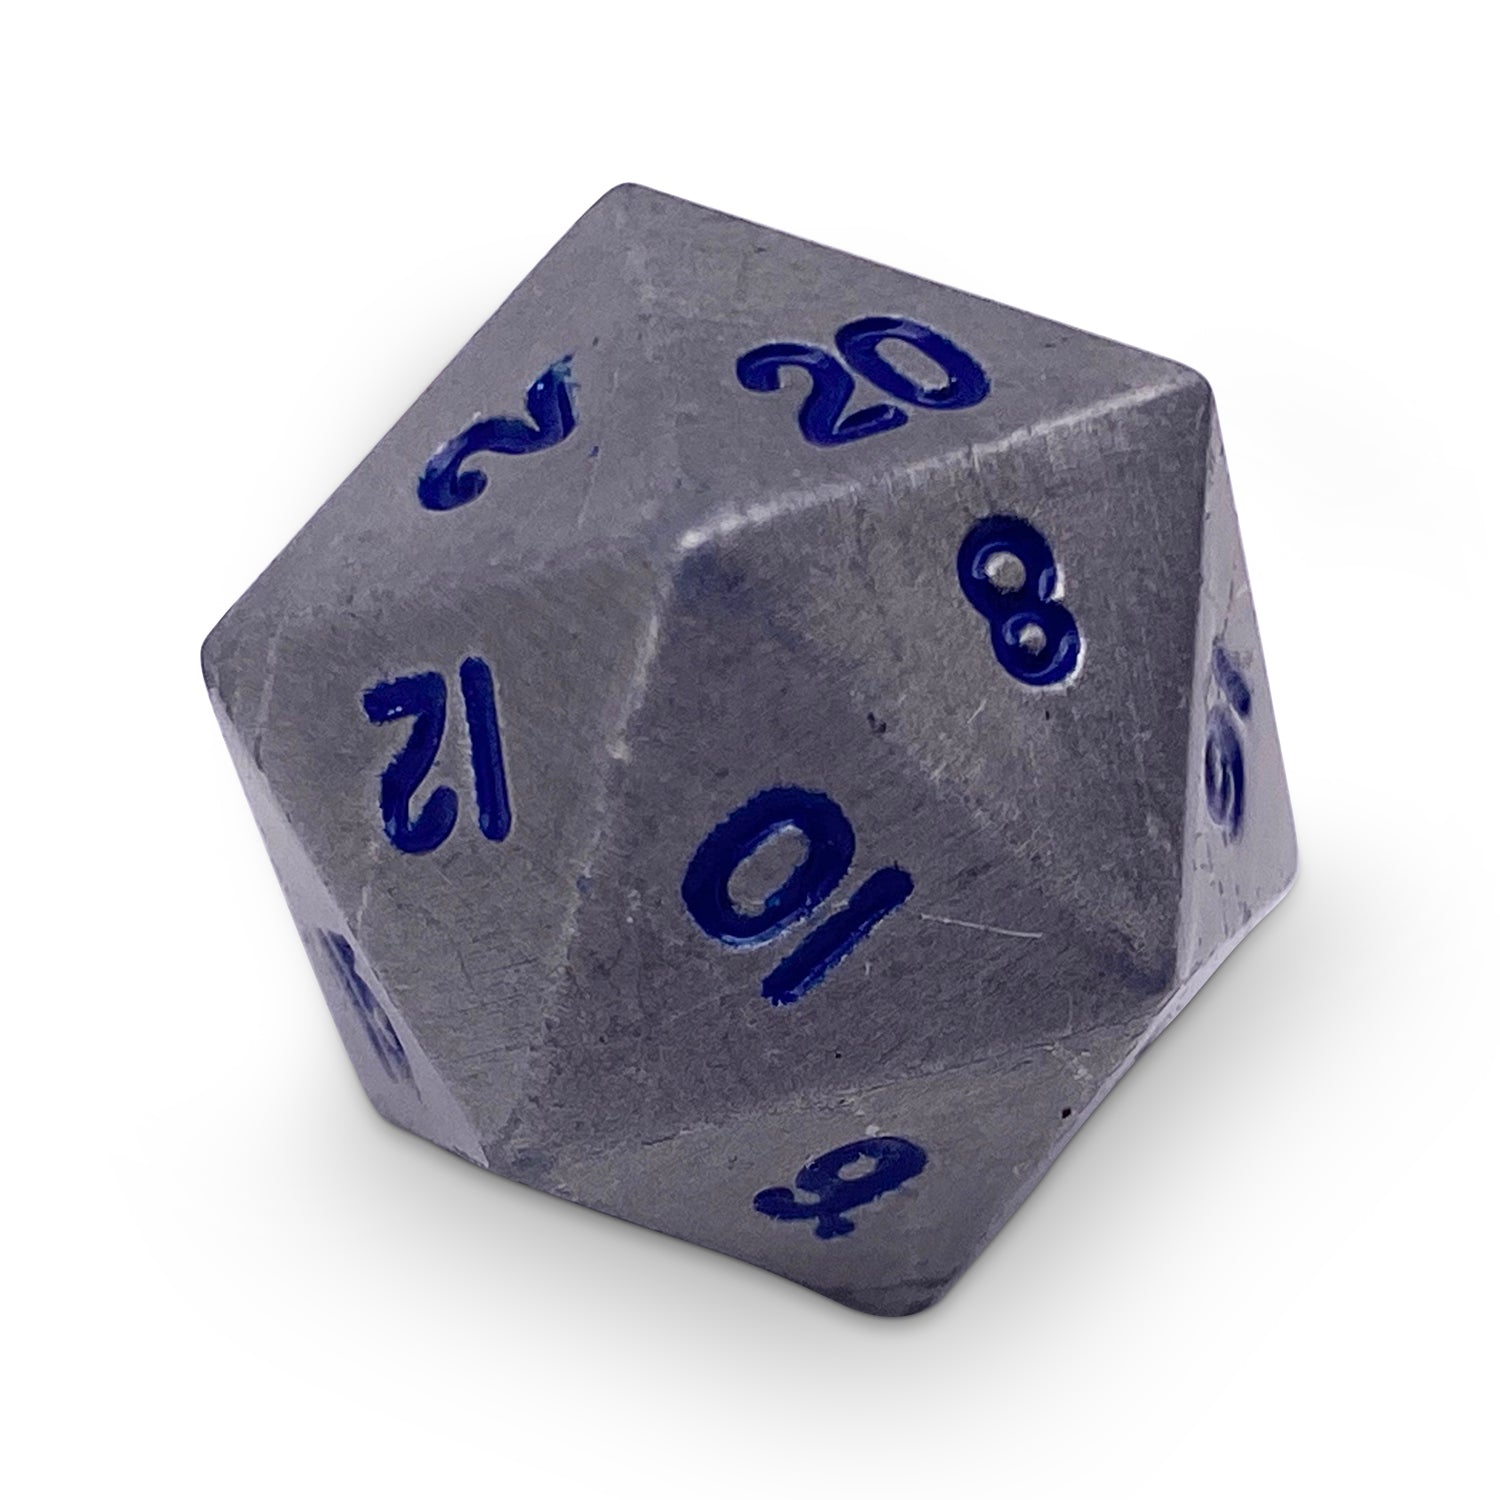 Single Alloy D20 in Atomic Metal by